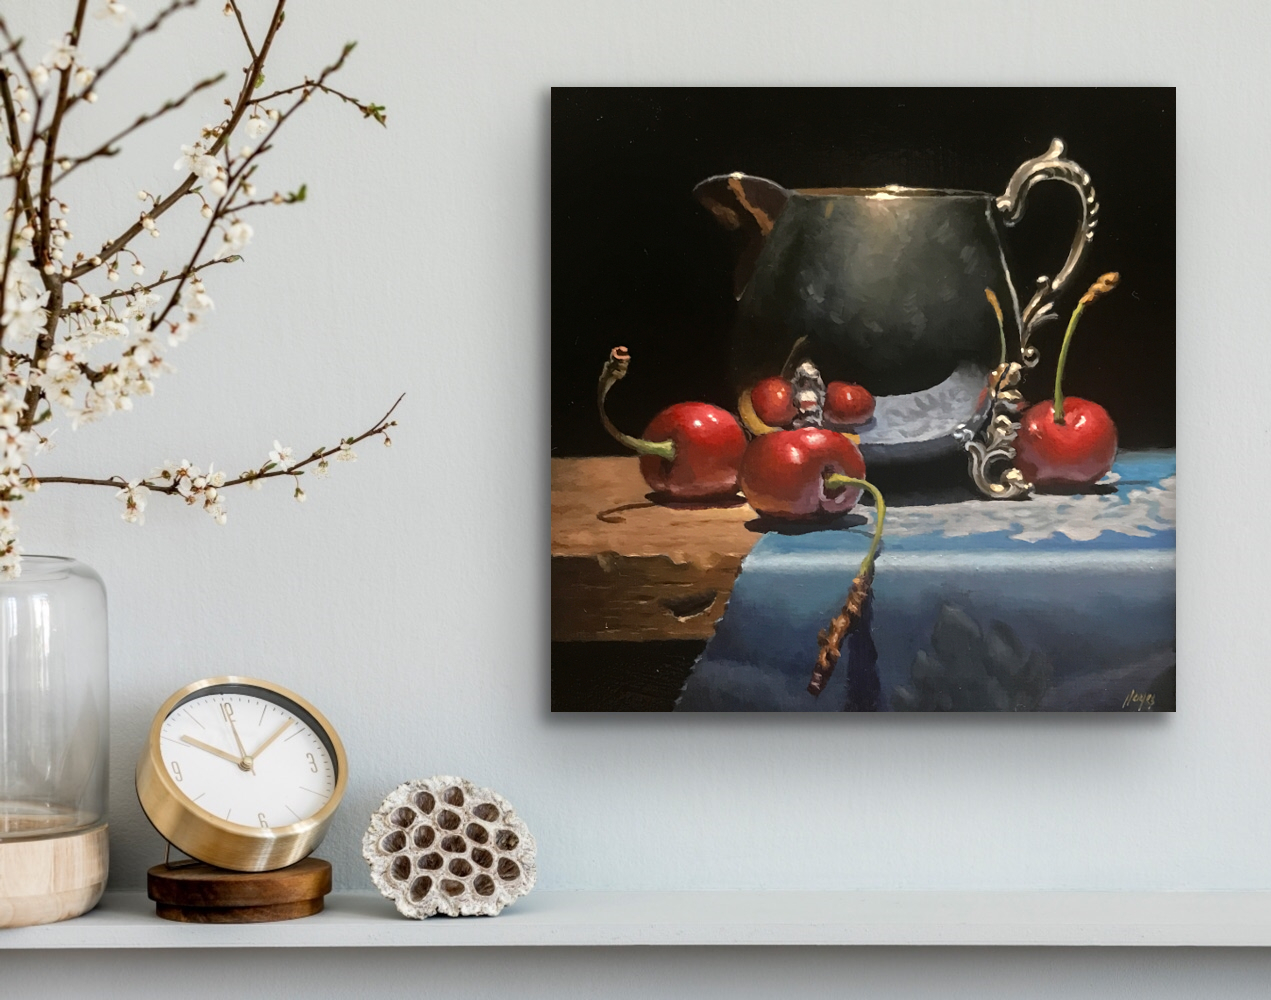 "Cherries and Silver" Gallery Wrap Canvas Print.